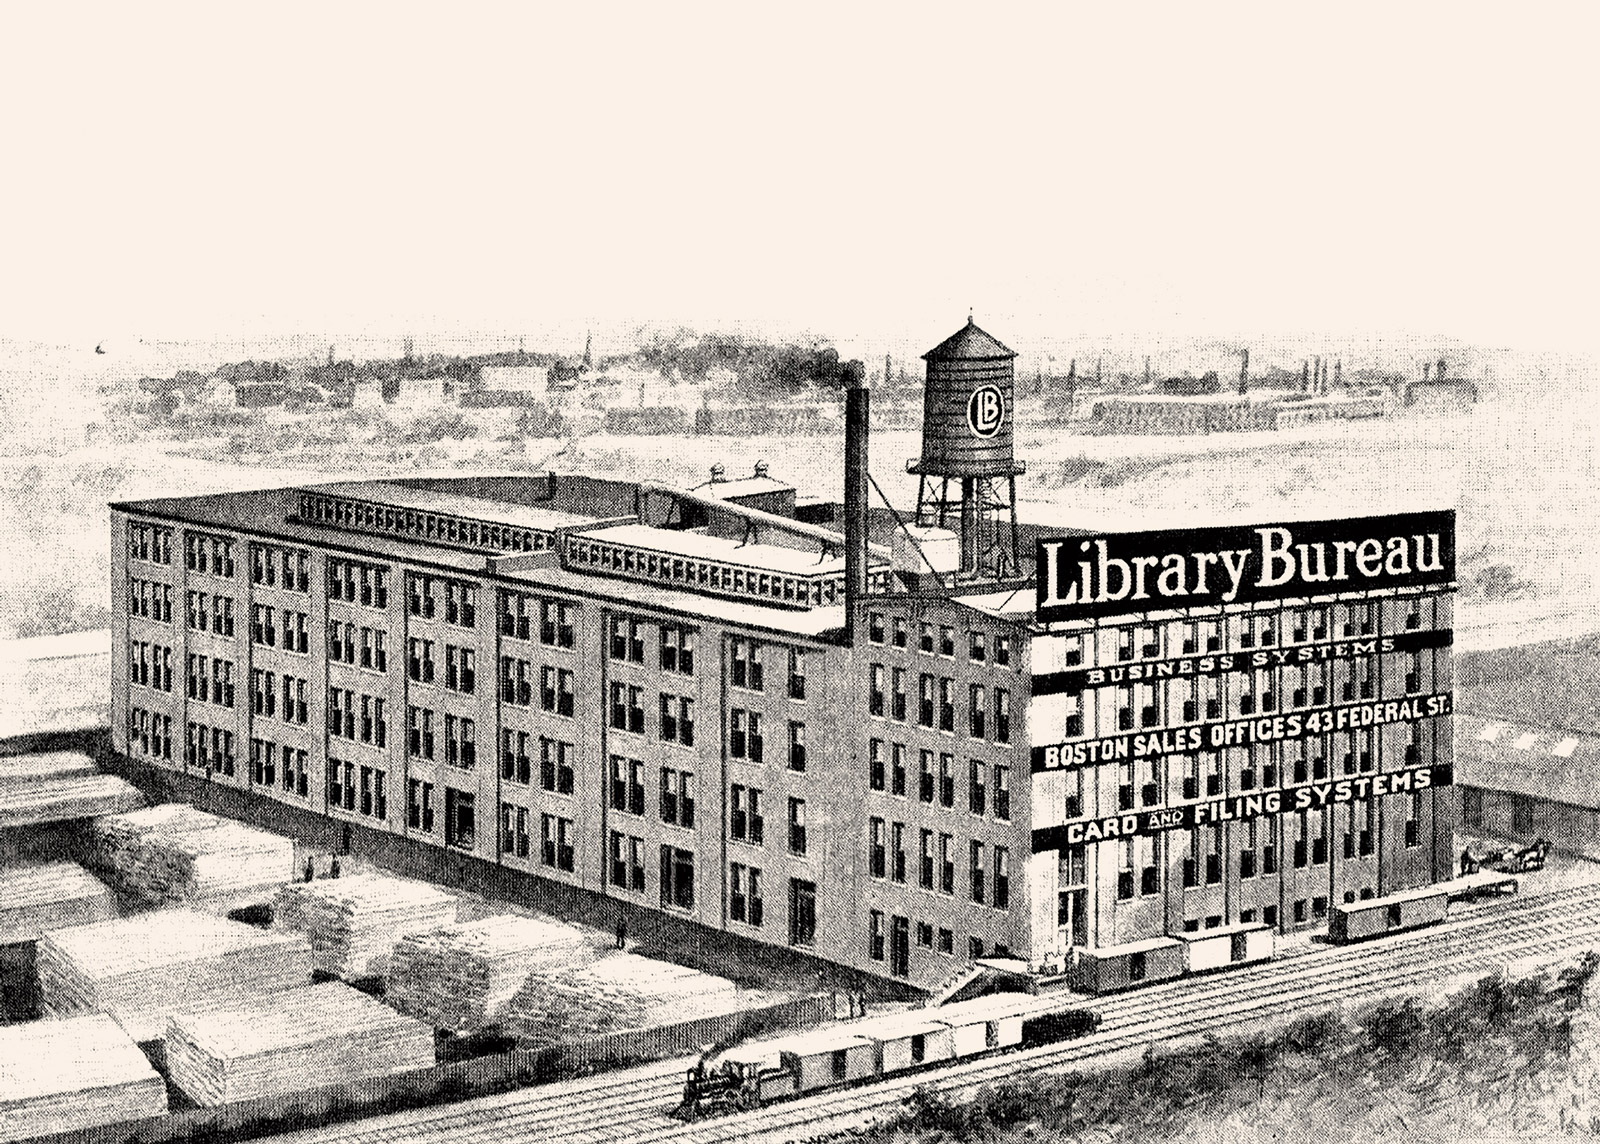 A nineteen oh nine image of a Library Bureau woodworking and card factory in Cambridge, Massachusetts